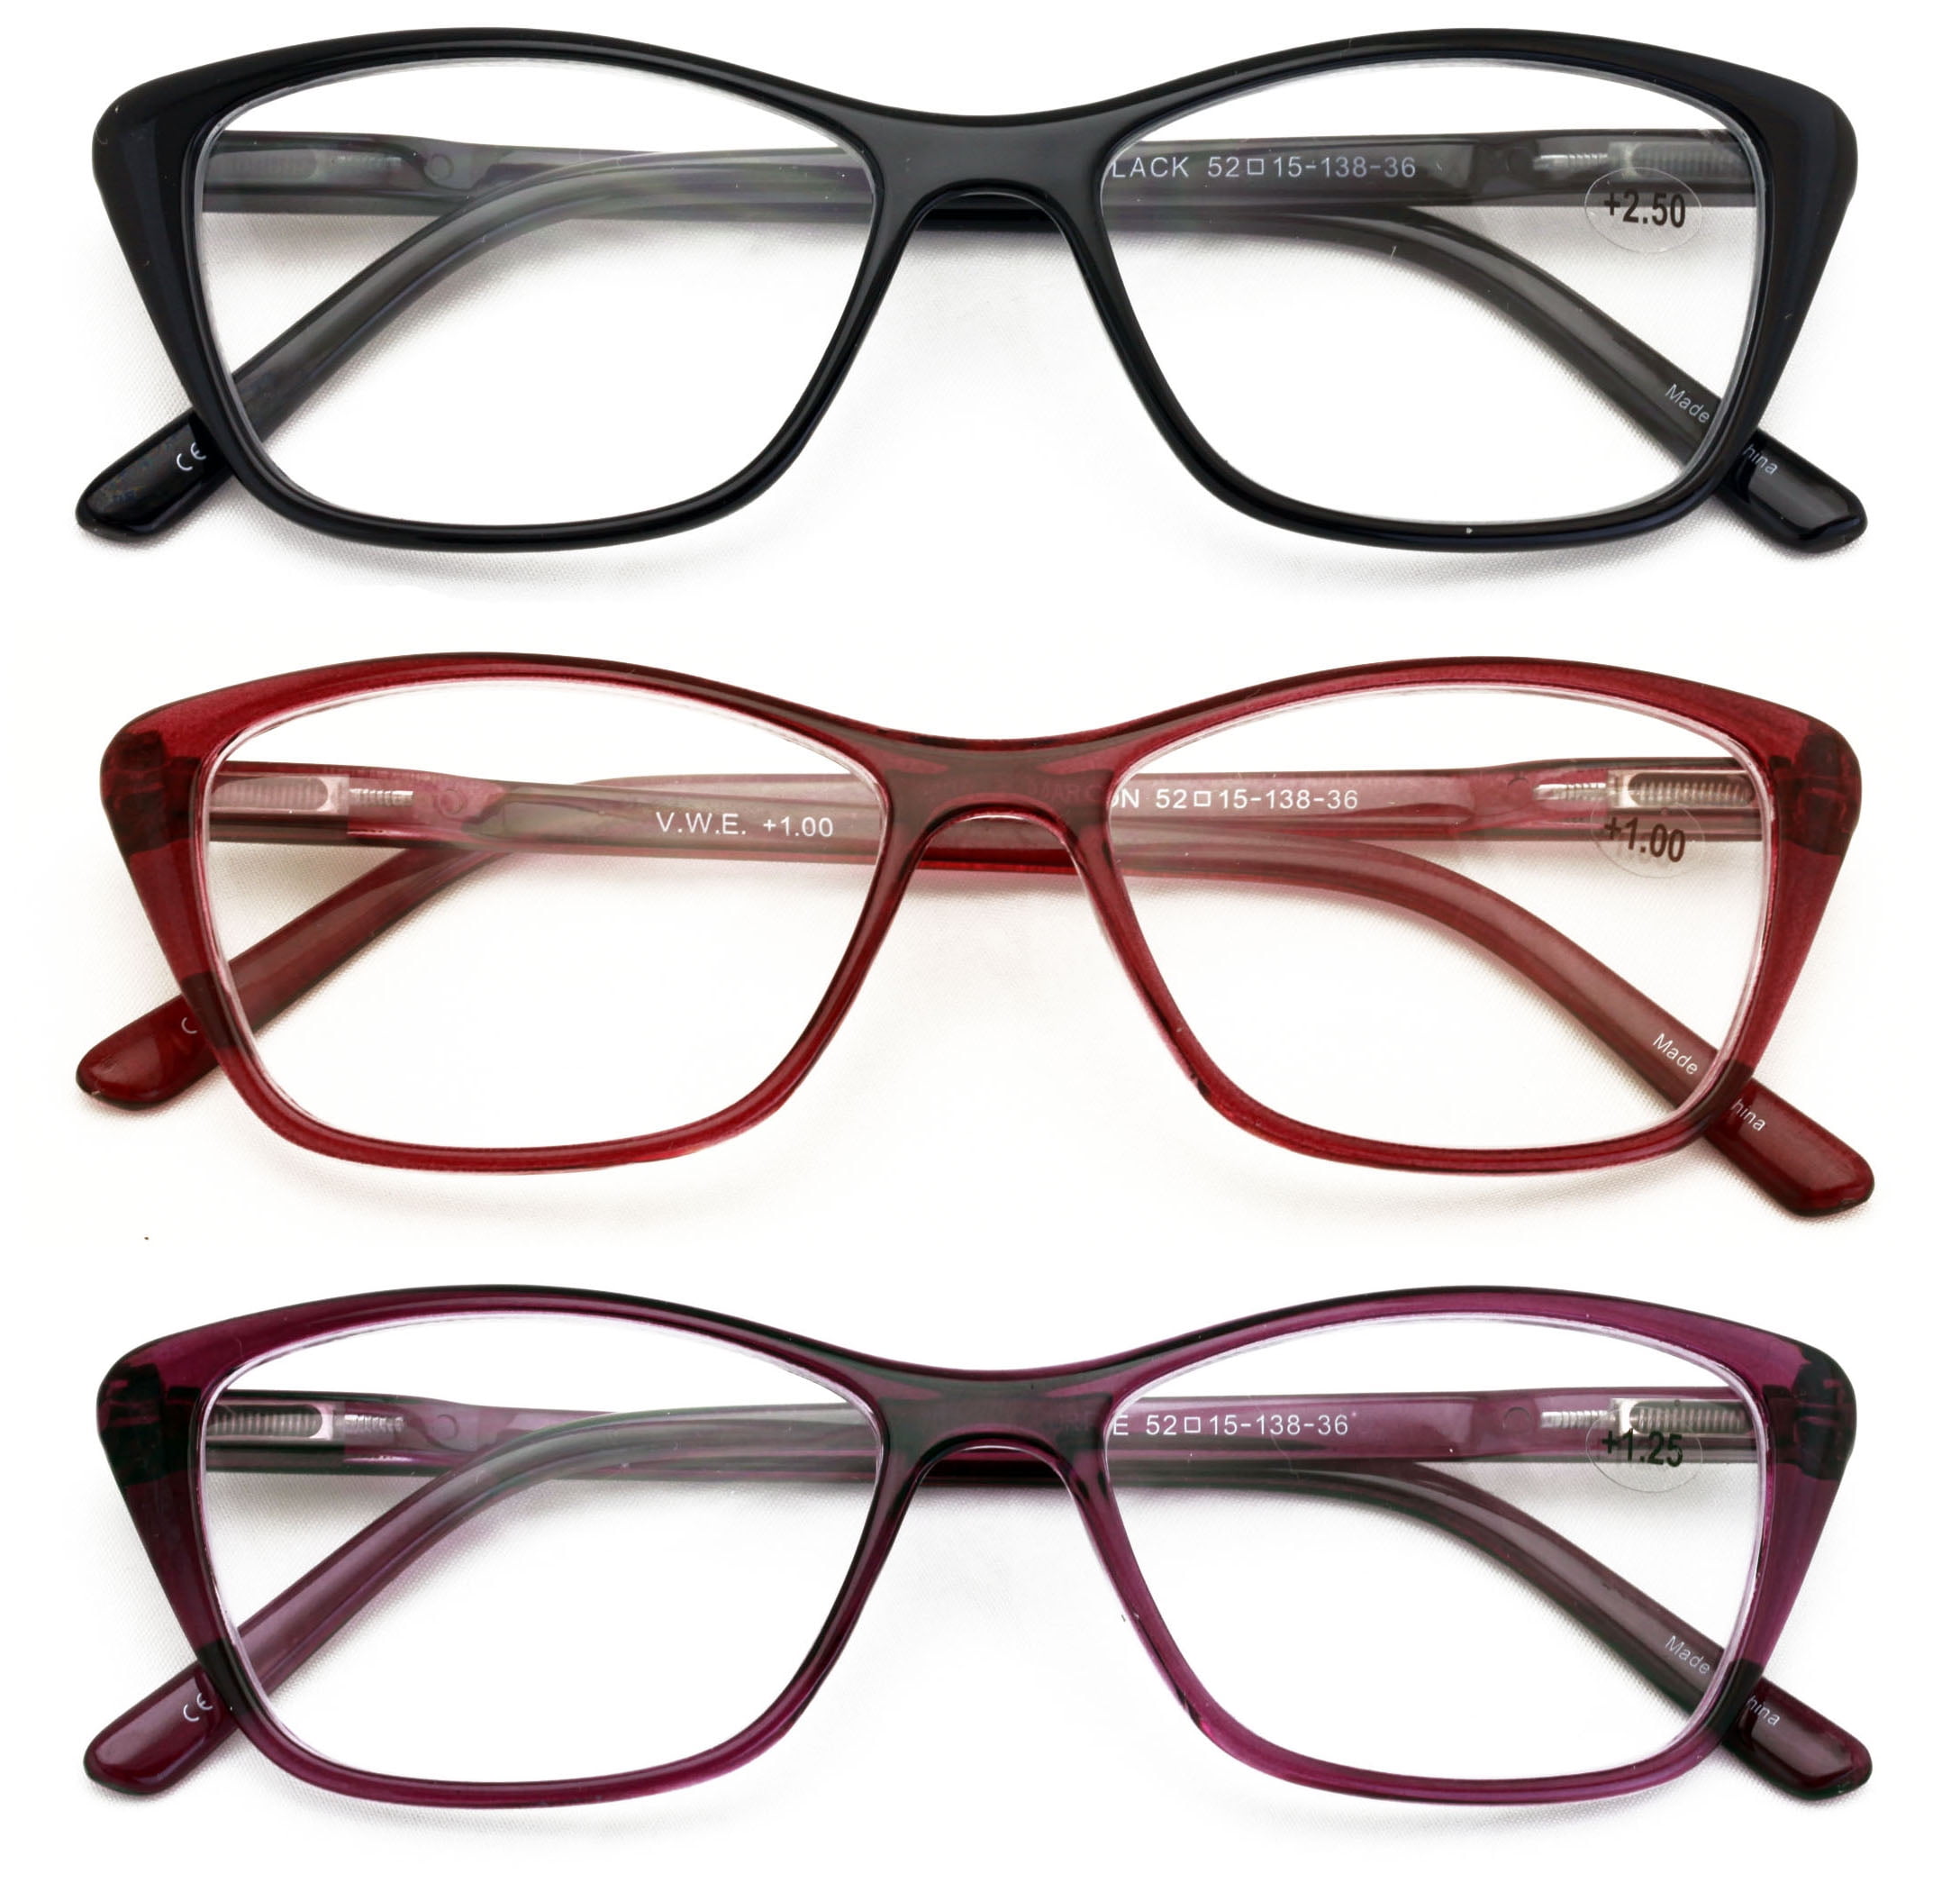 3 Pairs Women Lightweight Cateye Reading Glasses - Clear Lens Reader ...